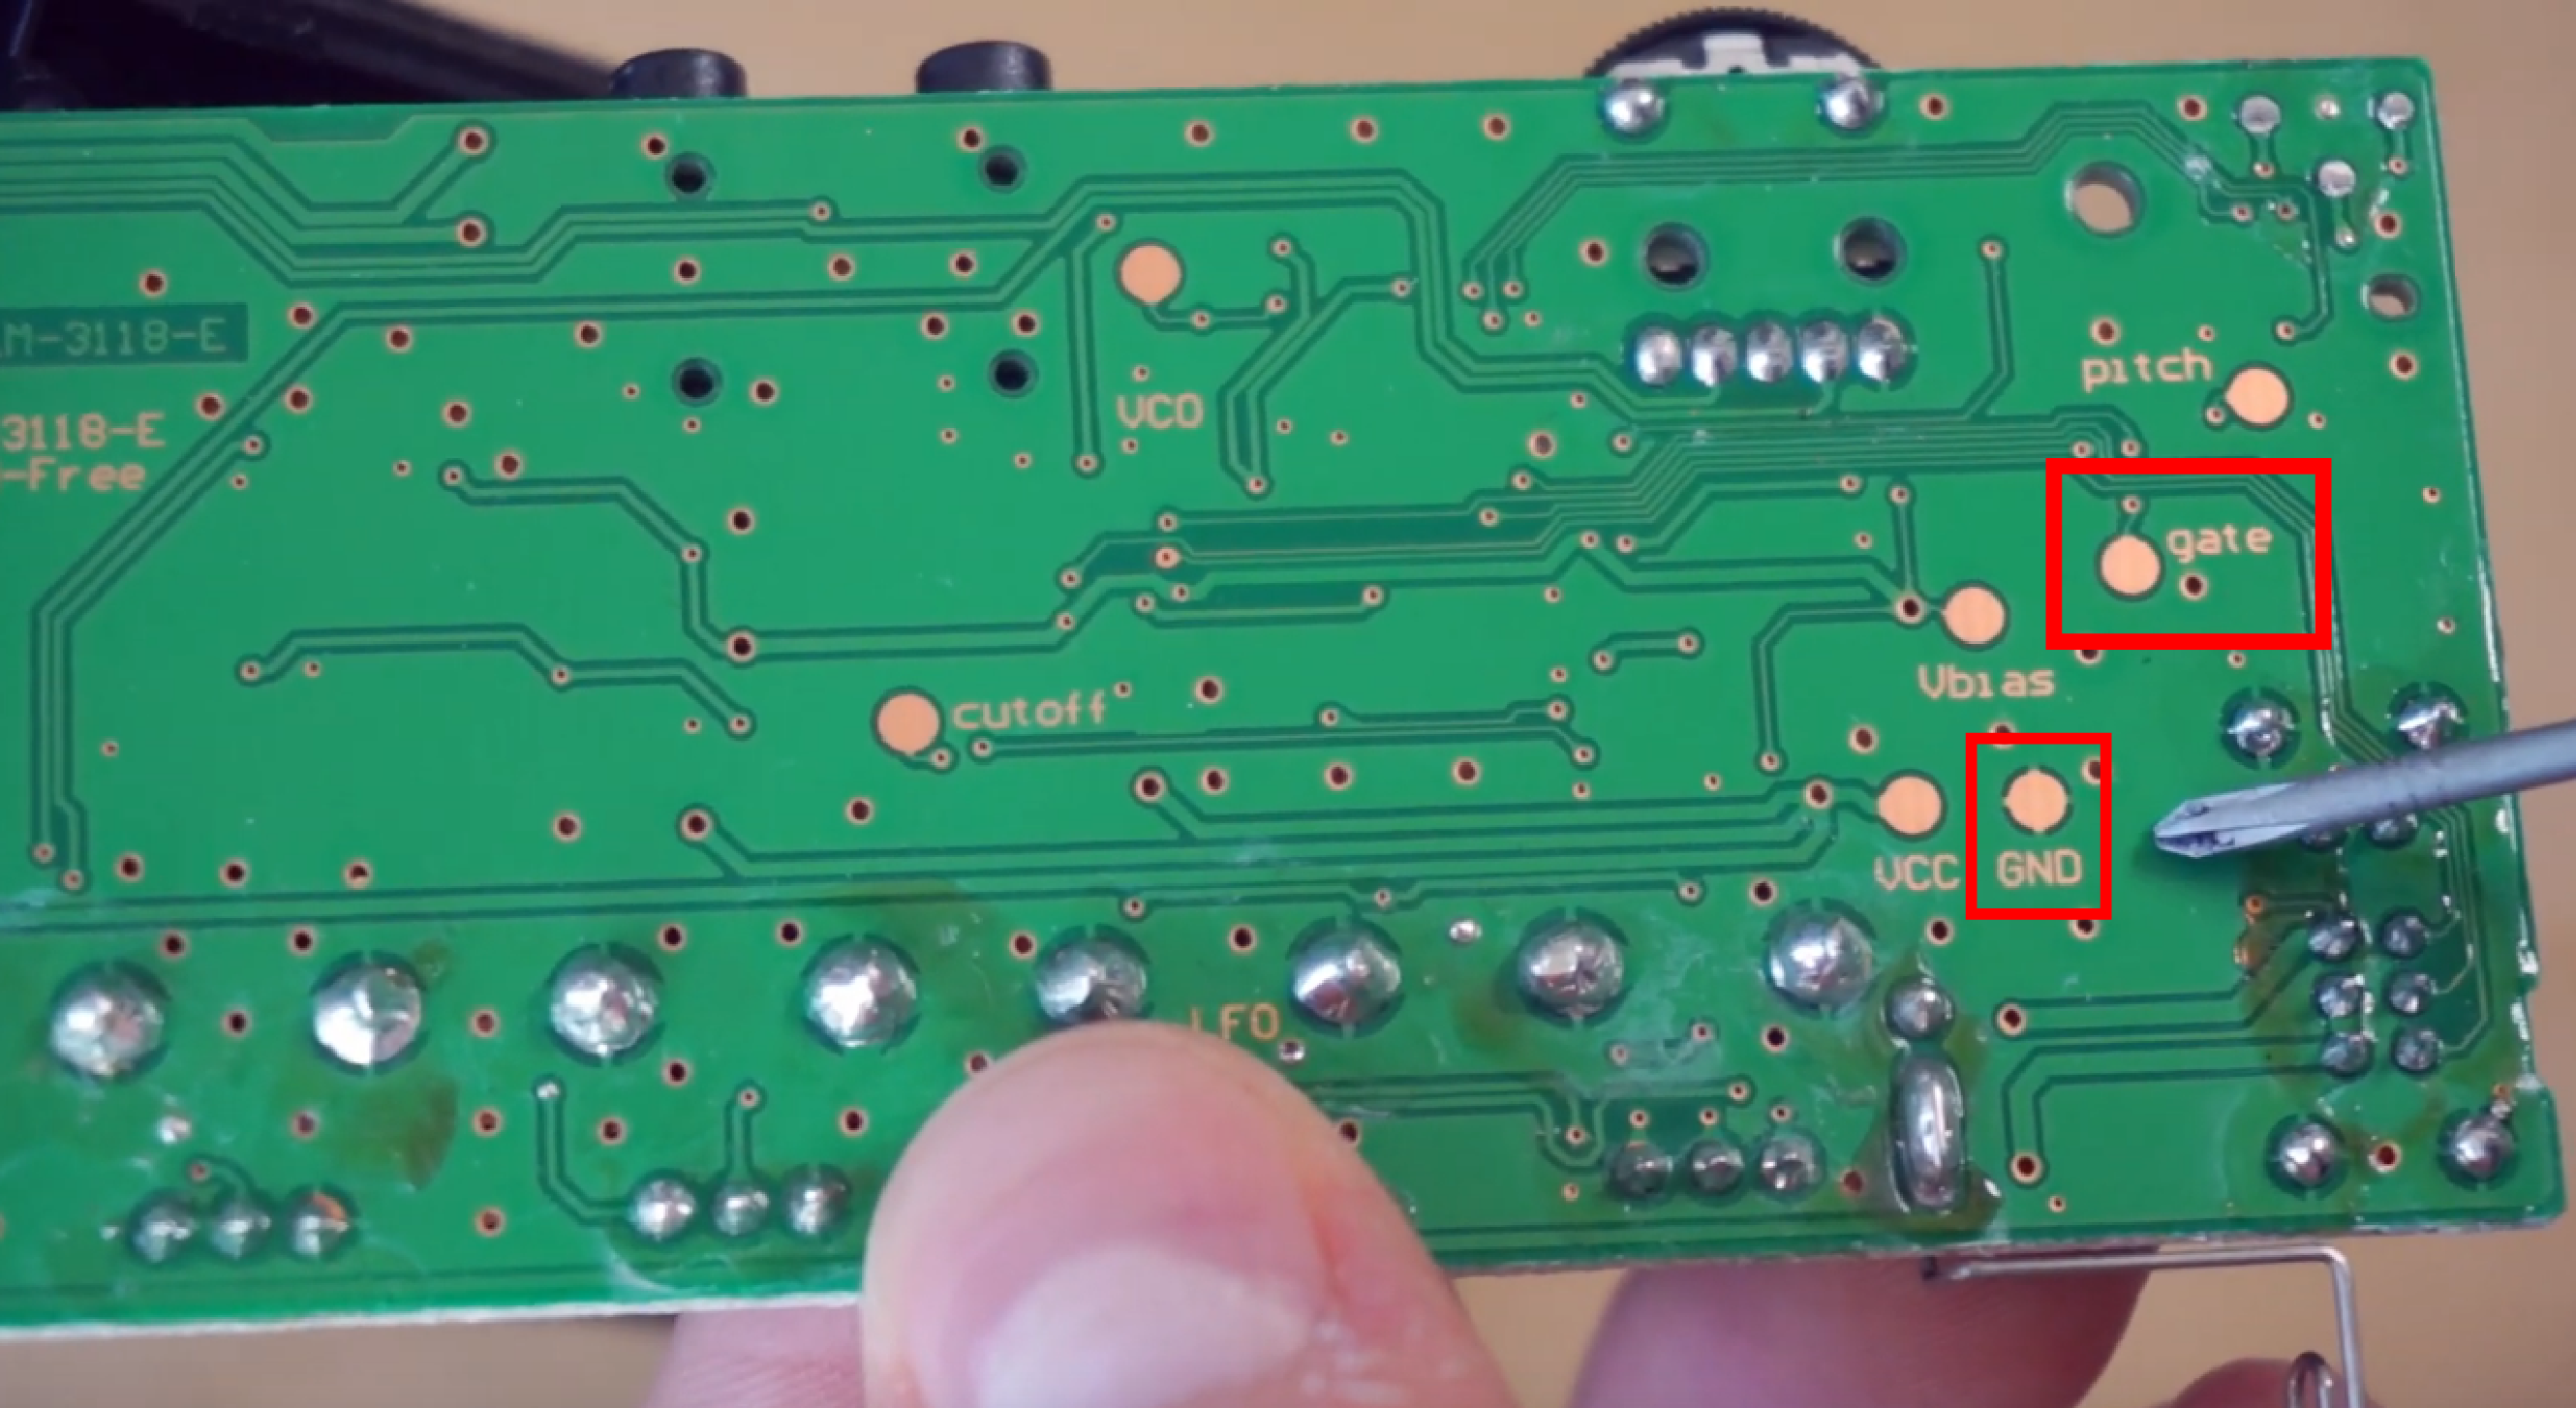 This is the back of the Monotron PCB before you solder.